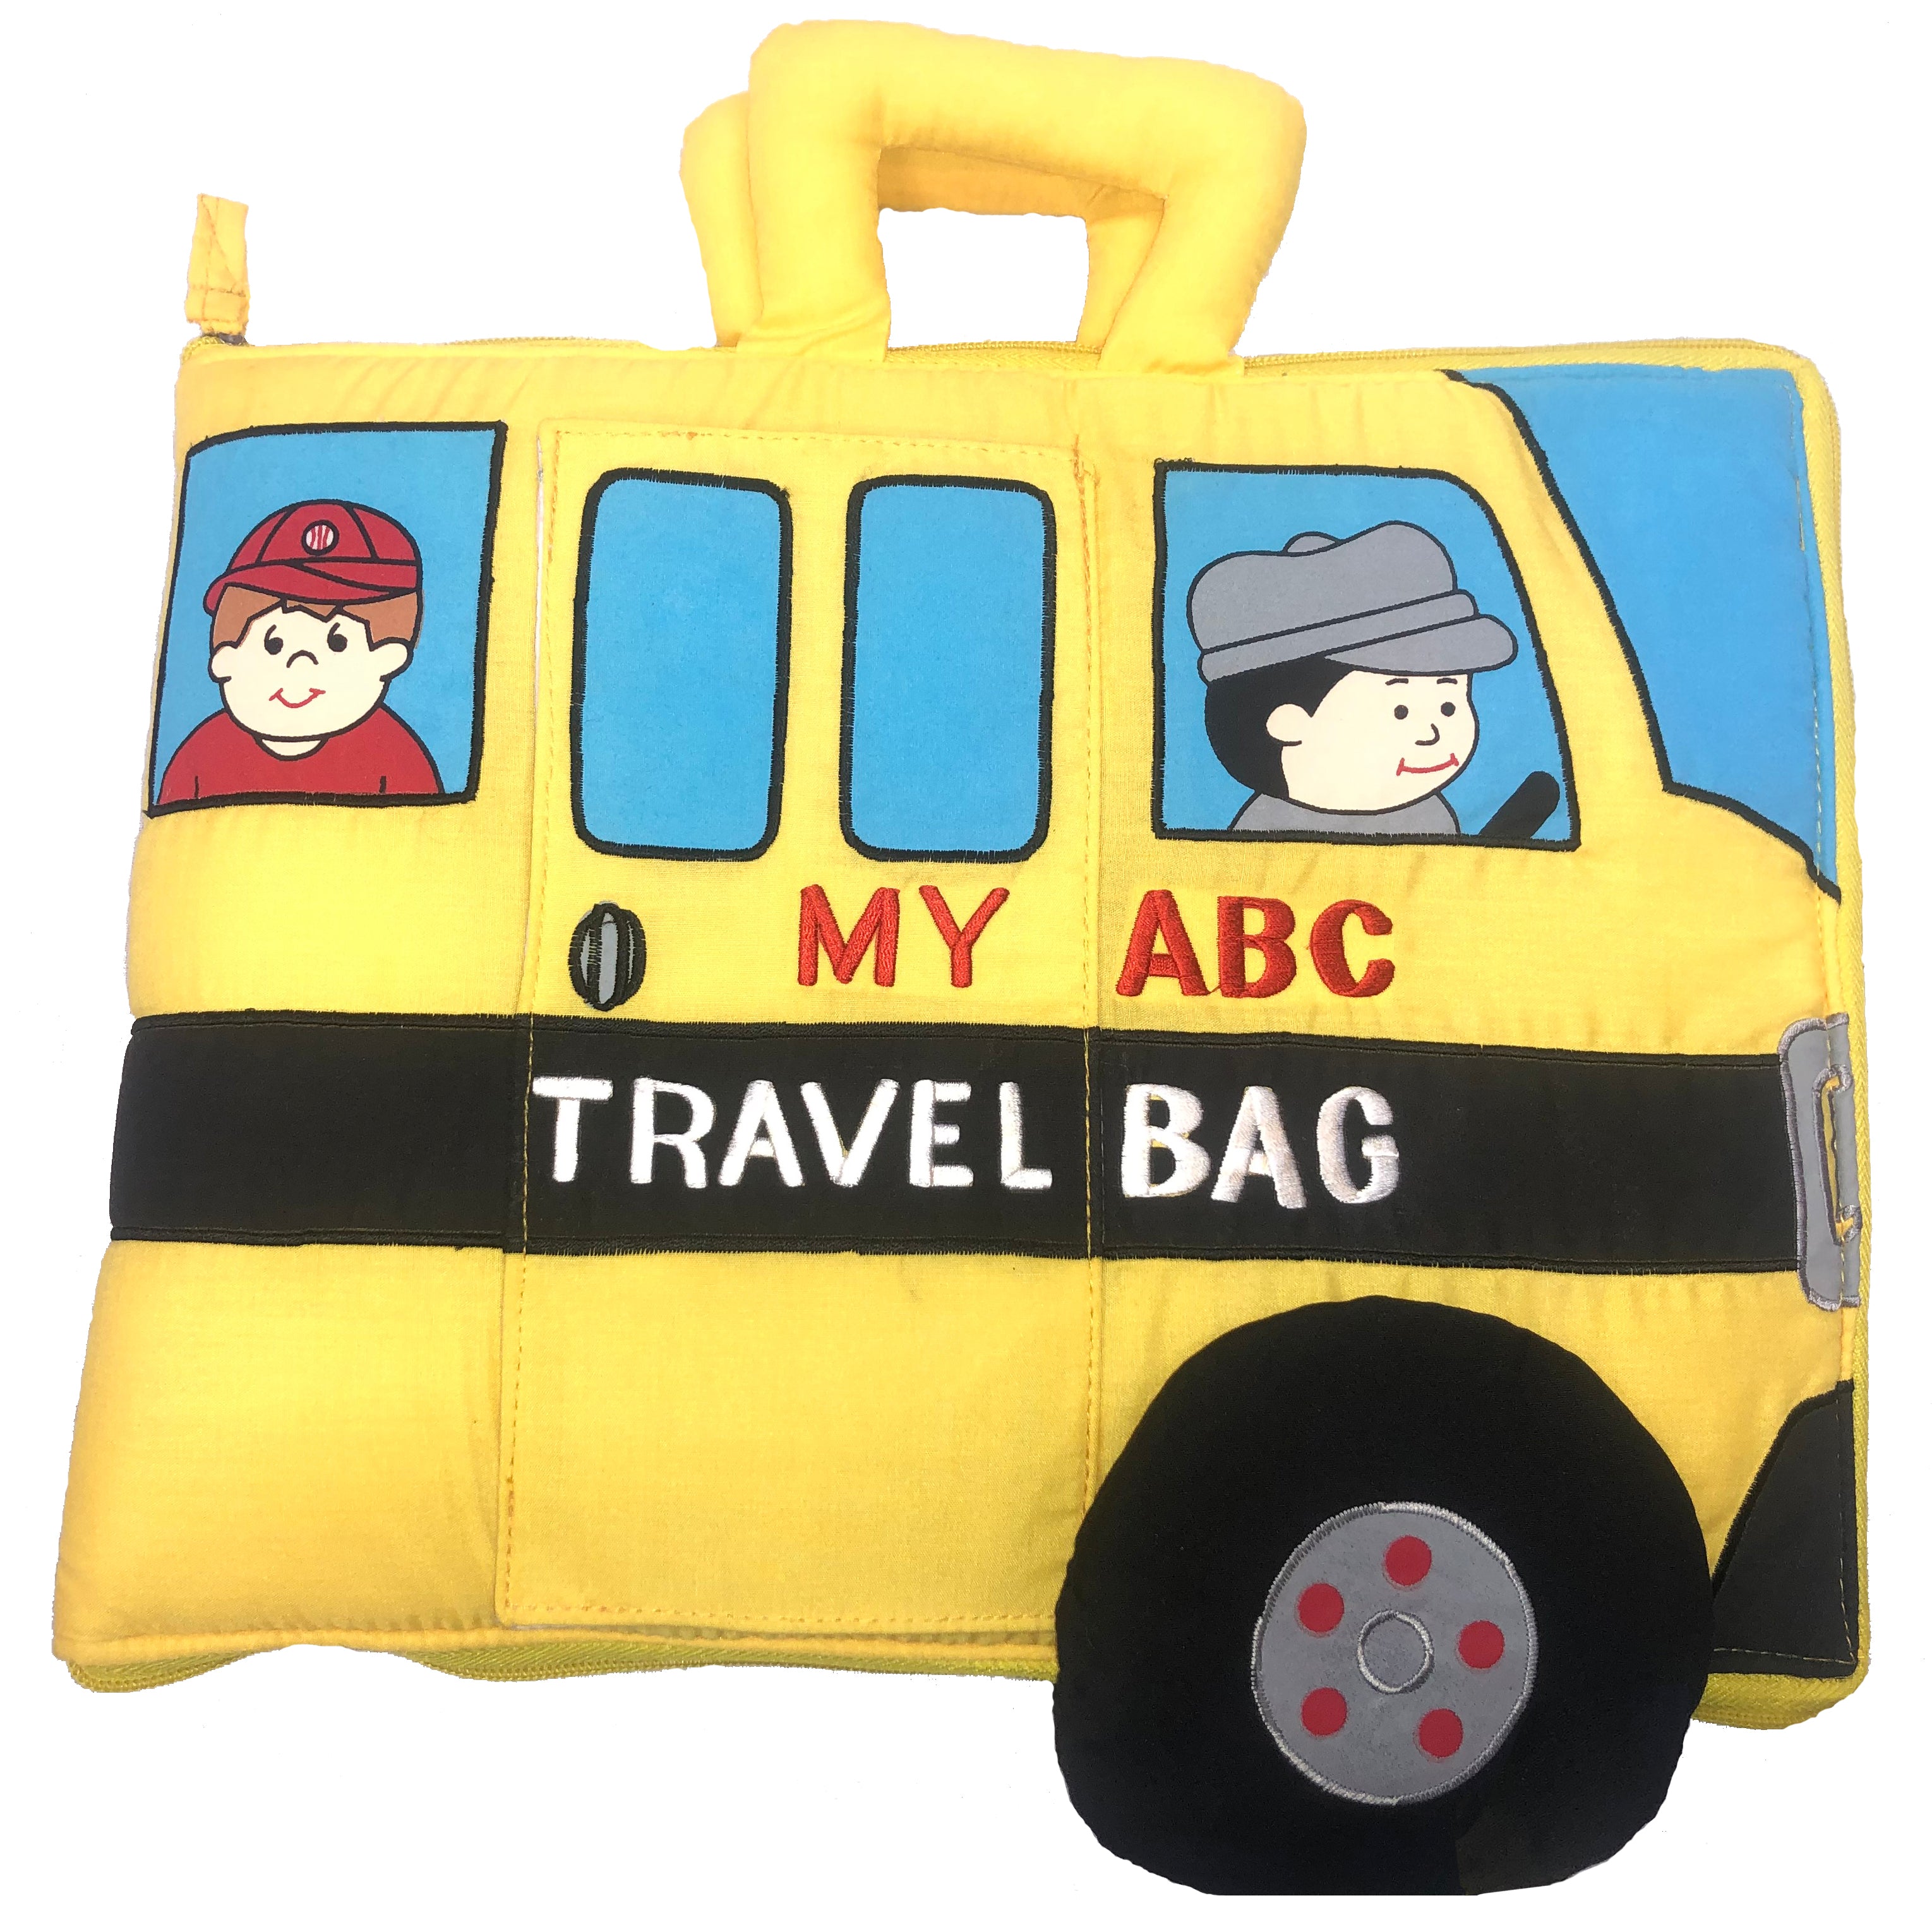 Pockets of Learning ABC School Bus